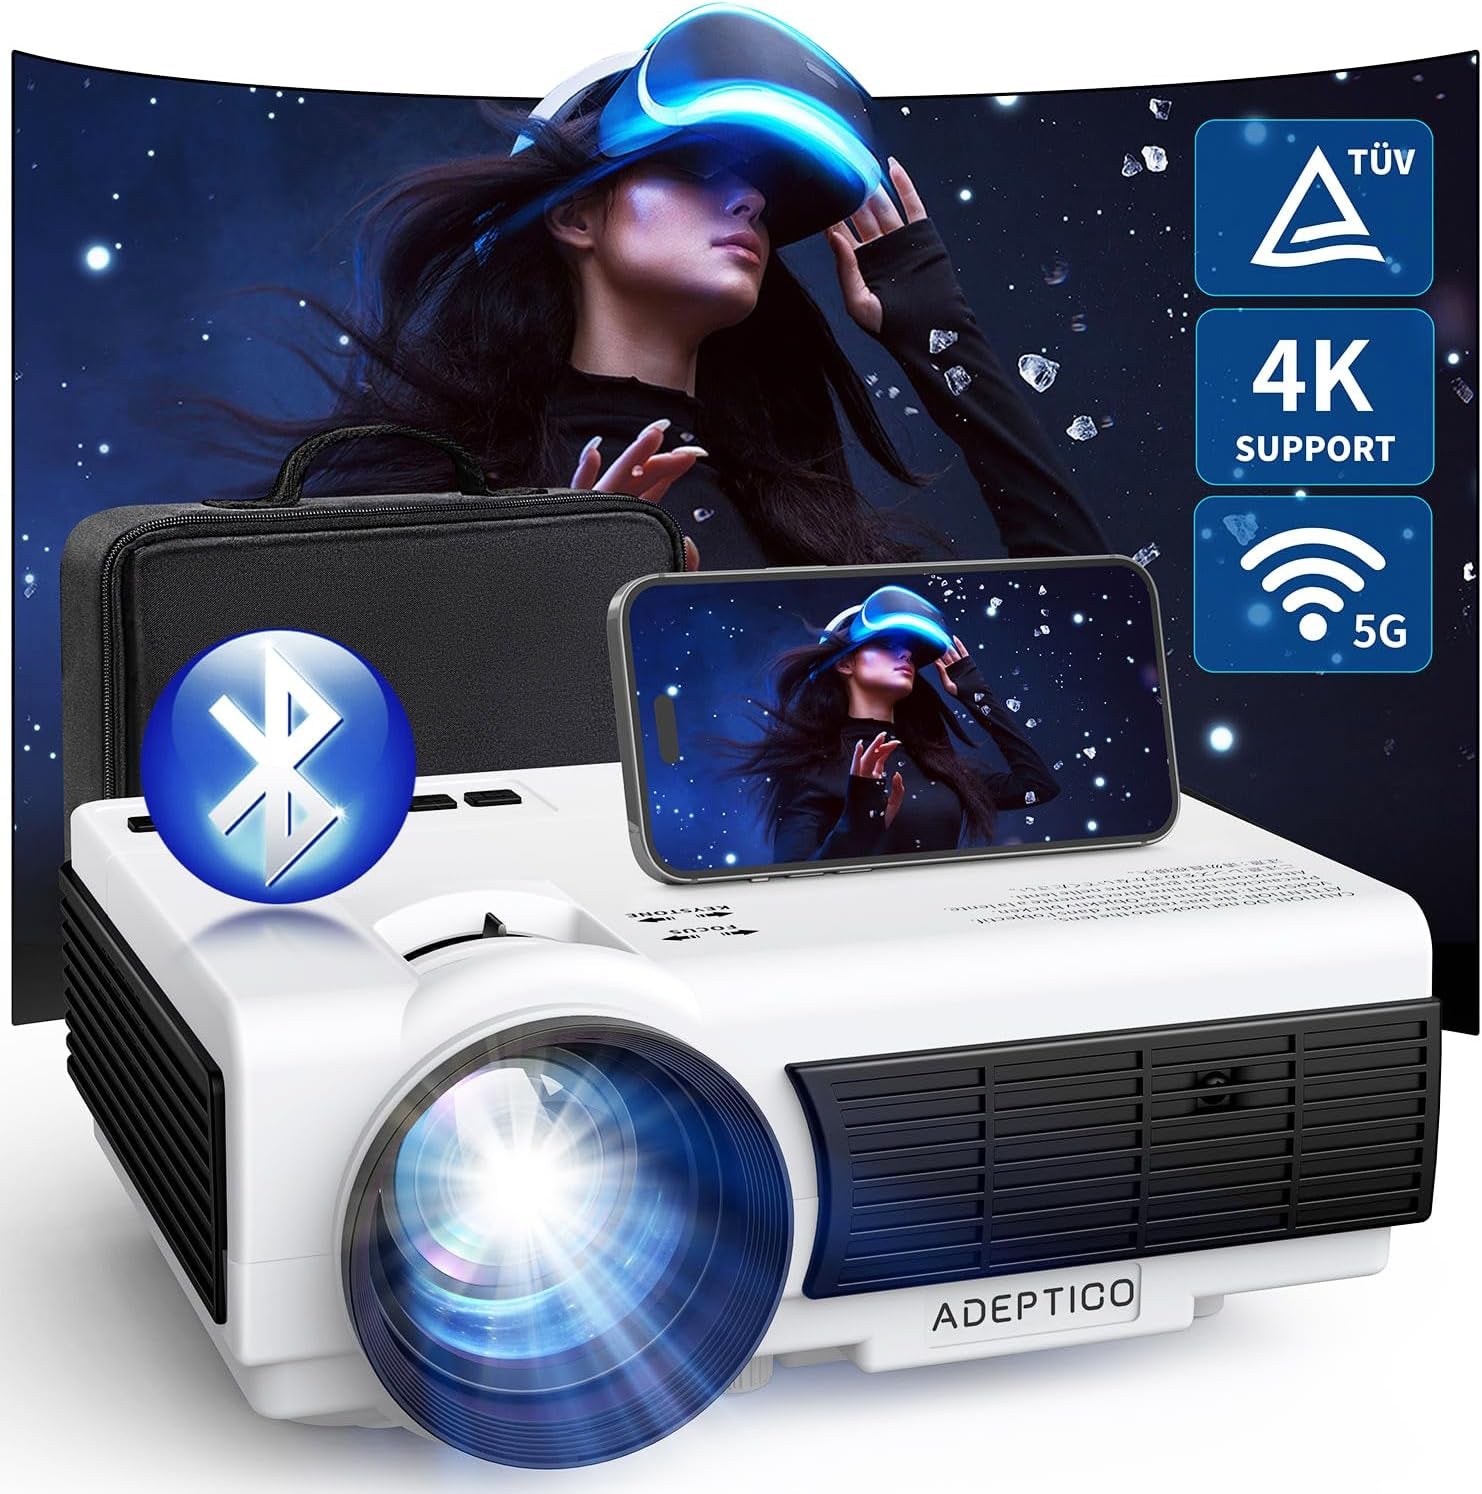 [Eyesafe Display] Projector with Wifi and Bluetooth,  450 ANSI 5G Wifi Native 1080P Portable Projector W/ Bag, 4K Support, Zoom, Outdoor Movie Mini Projector for Ios/Android/Tv Stick/Hdmi/Usb